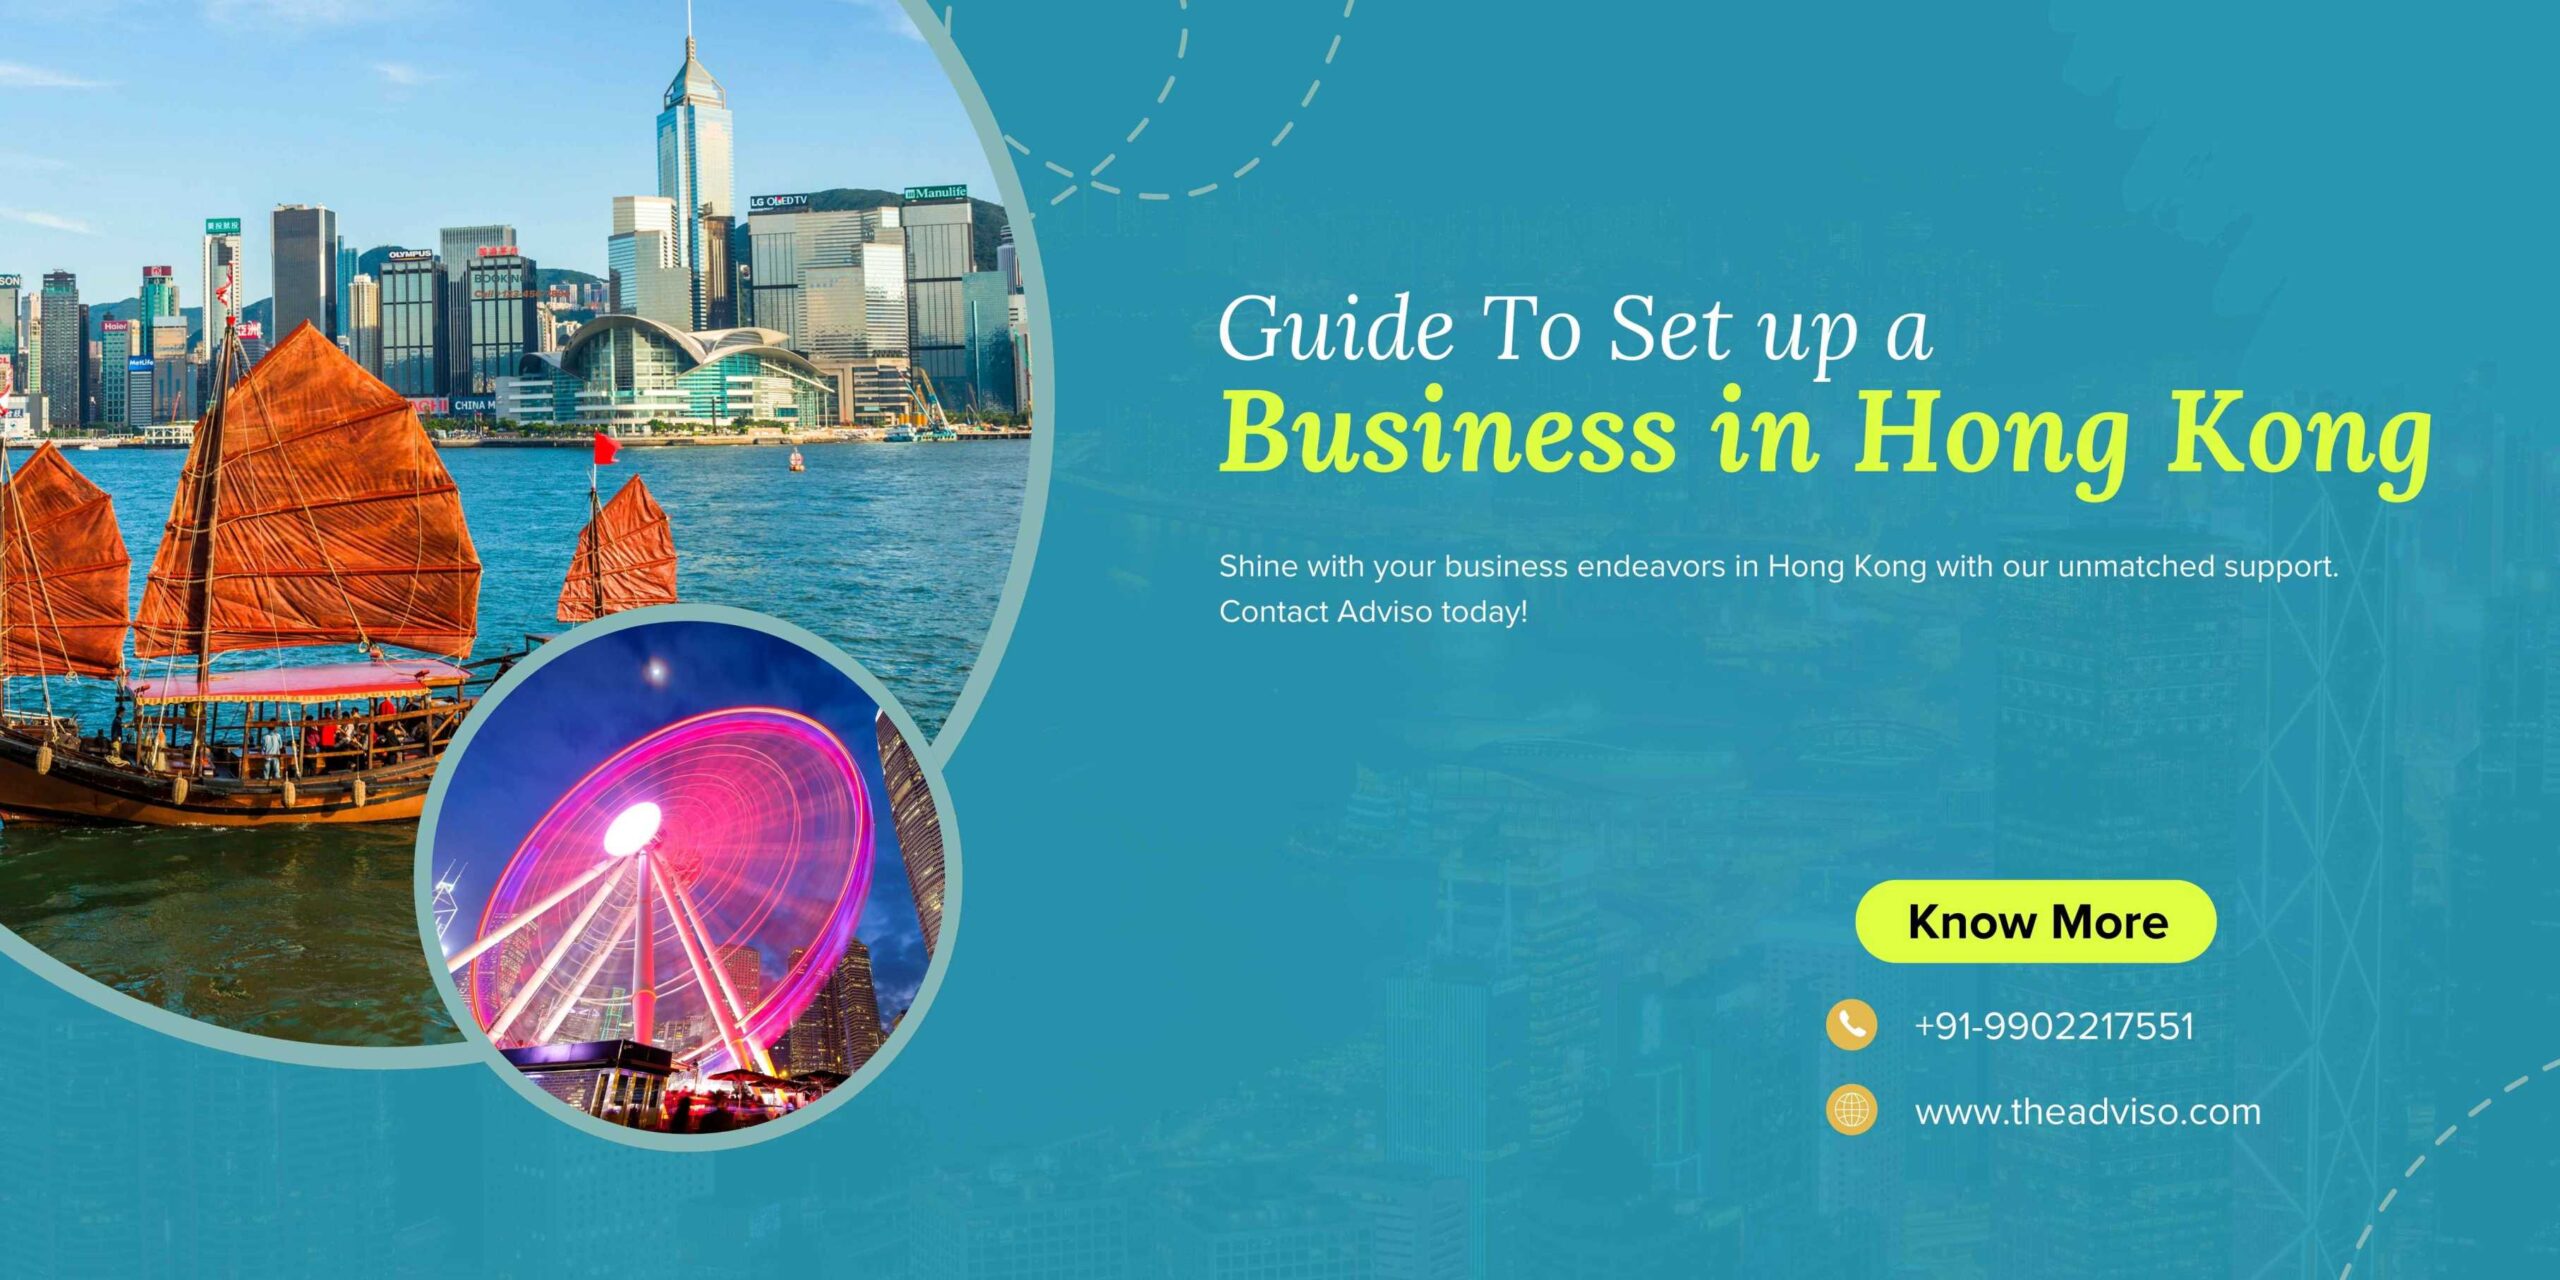 Guide To Set up a Business in Hong Kong